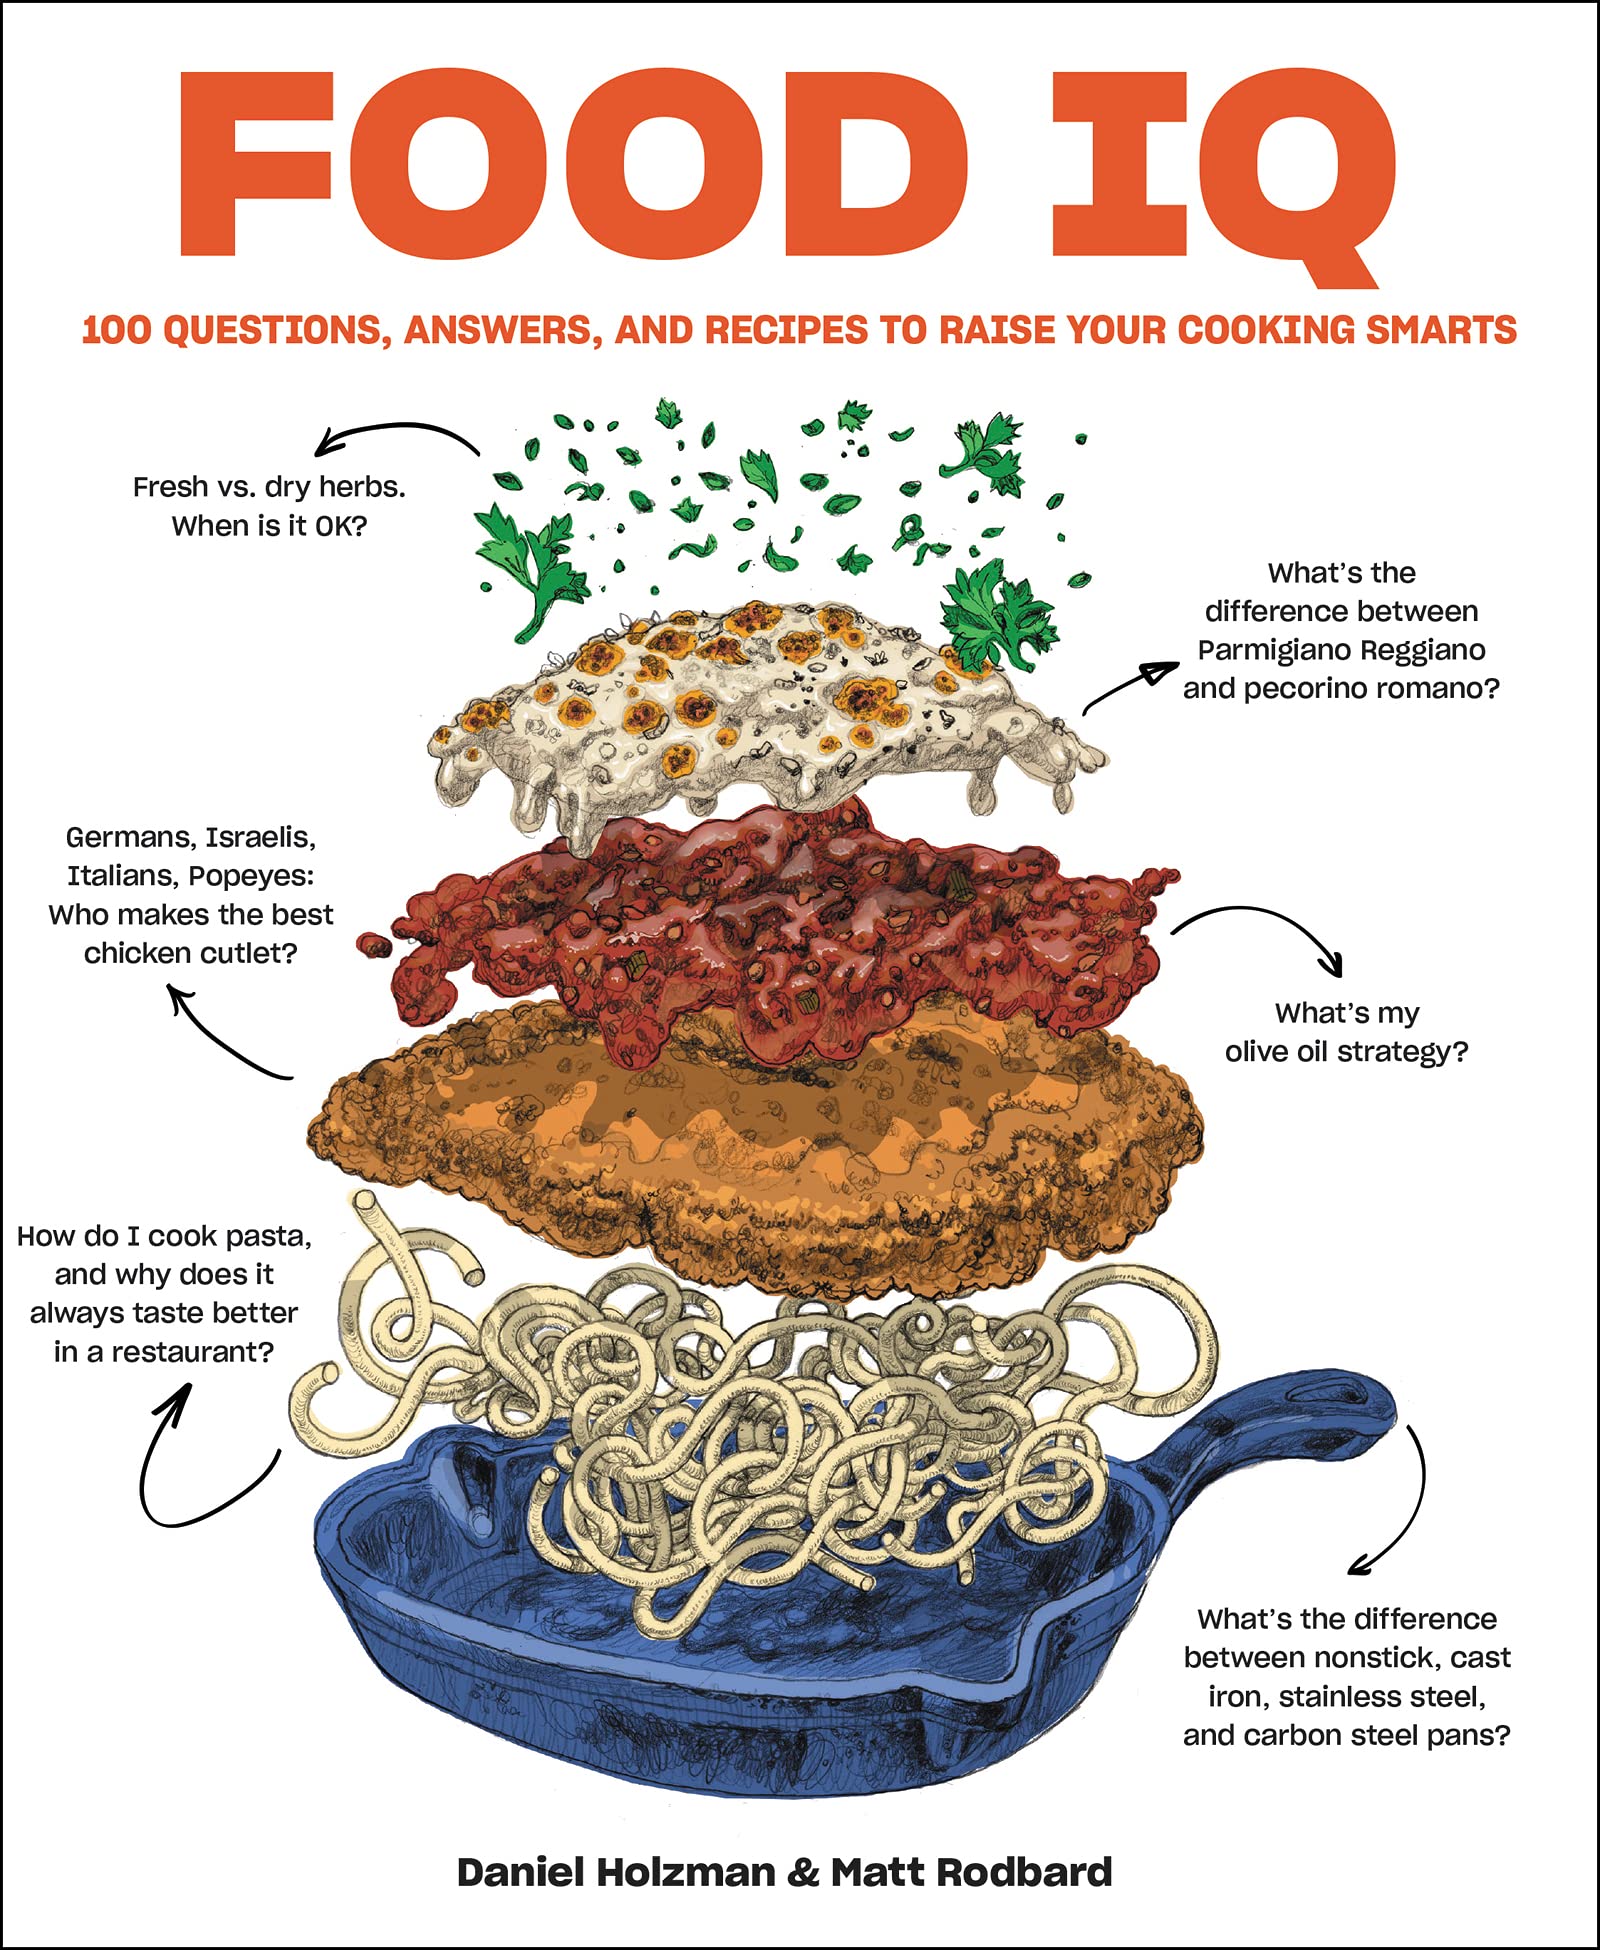 Food IQ: 100 Questions, Answers, and Recipes to Raise Your Cooking Smarts (Daniel Holzman, Matt Rodbard) *Signed*